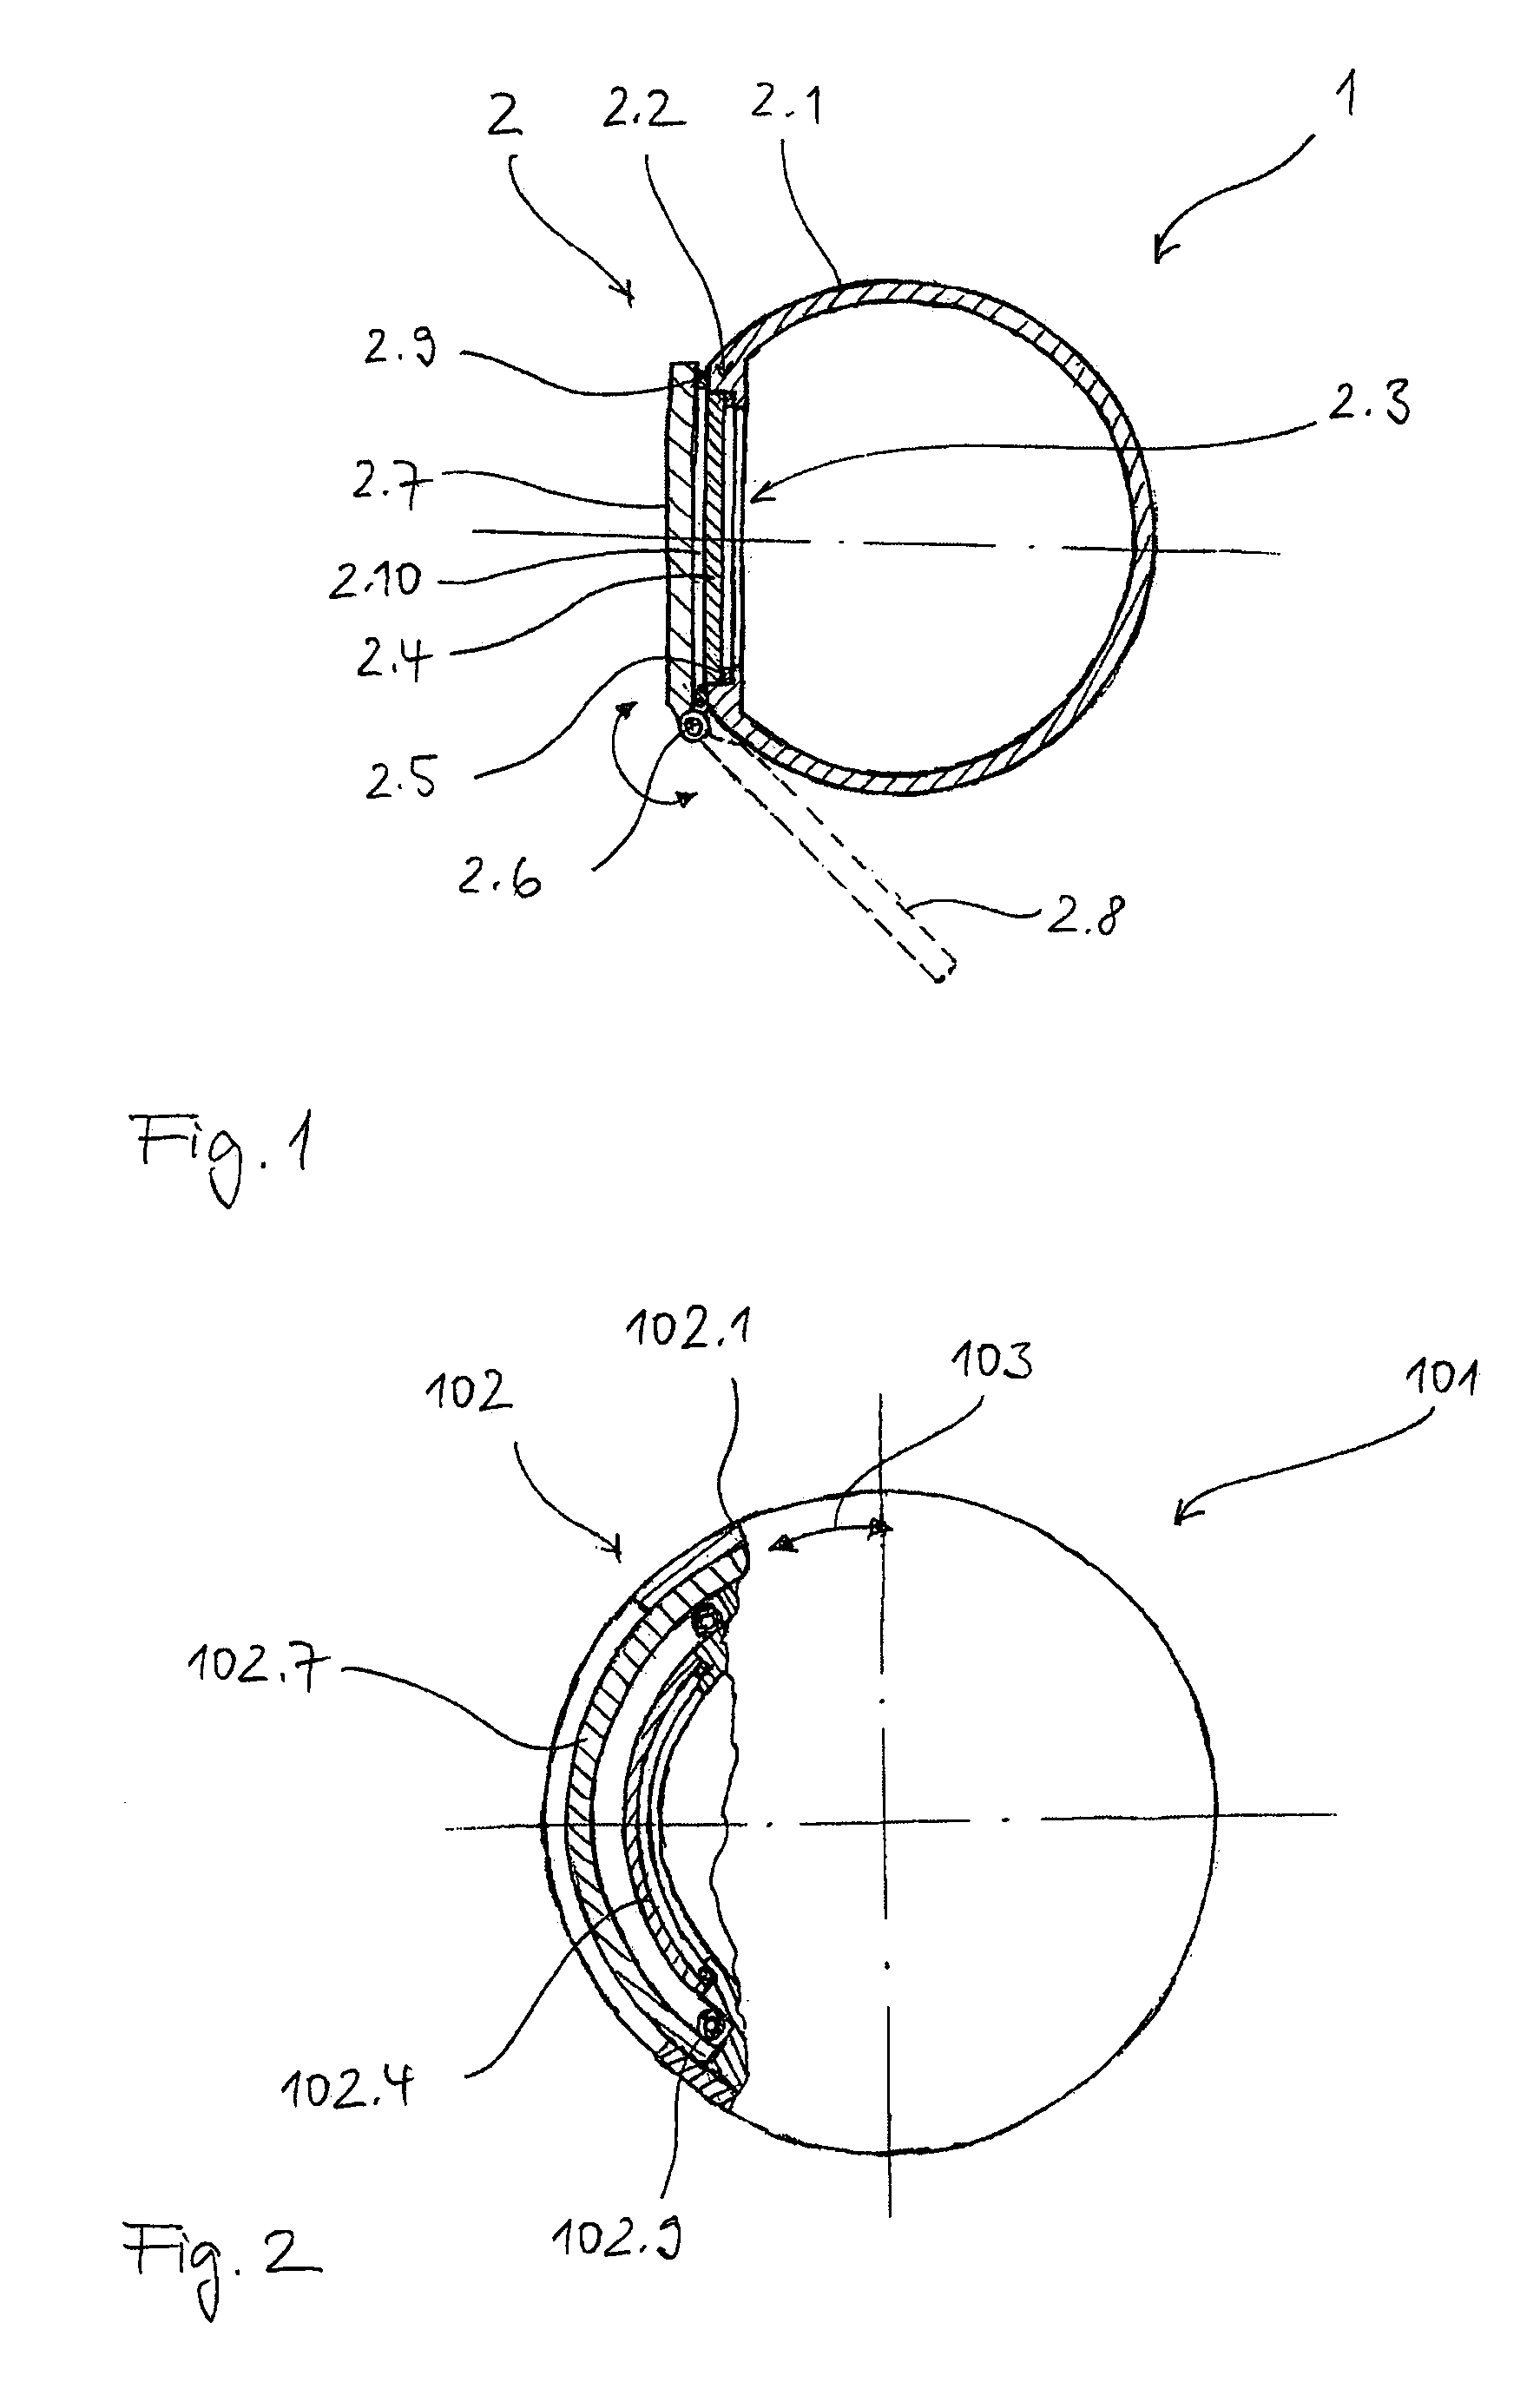 Optical device for use under significantly varying ambient pressure